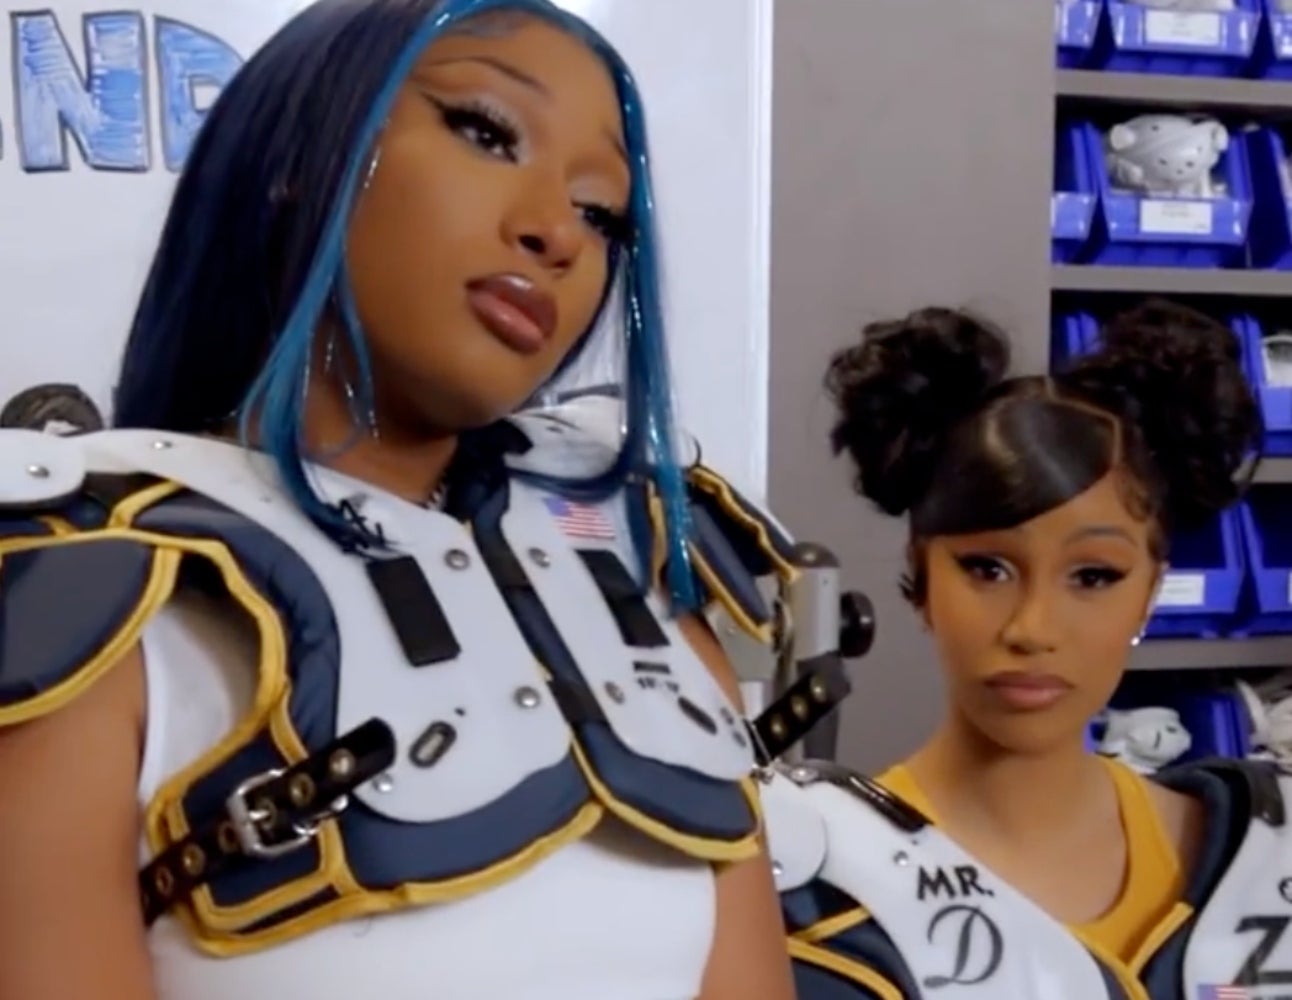 Cardi B And Megan Thee Stallion Put On Their Game Faces For New Episode Of 'Cardi Tries'